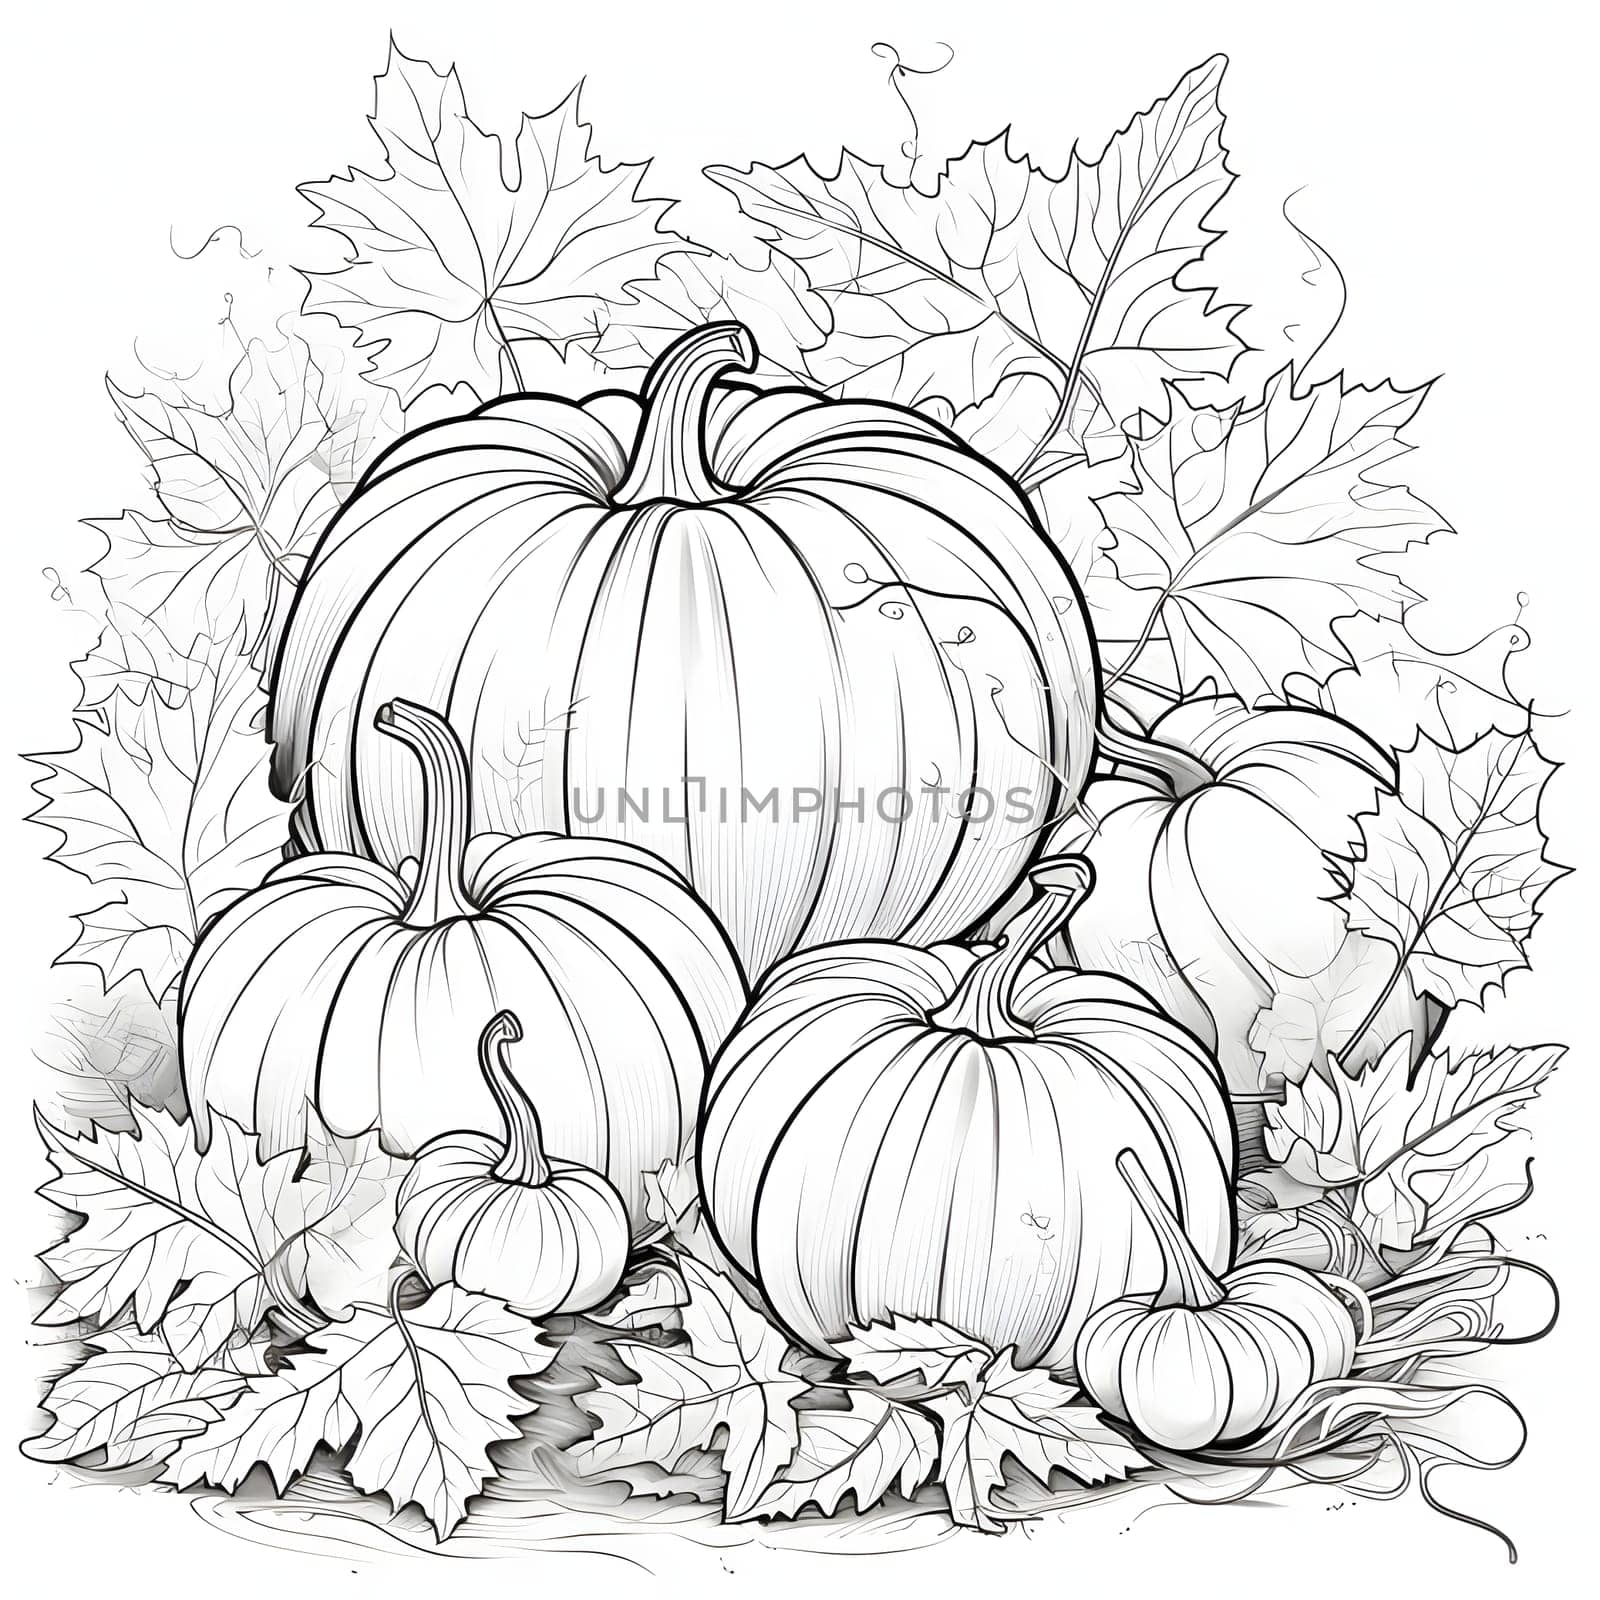 Pumpkins and leaves black and white coloring book. Pumpkin as a dish of thanksgiving for the harvest, picture on a white isolated background. Atmosphere of joy and celebration.